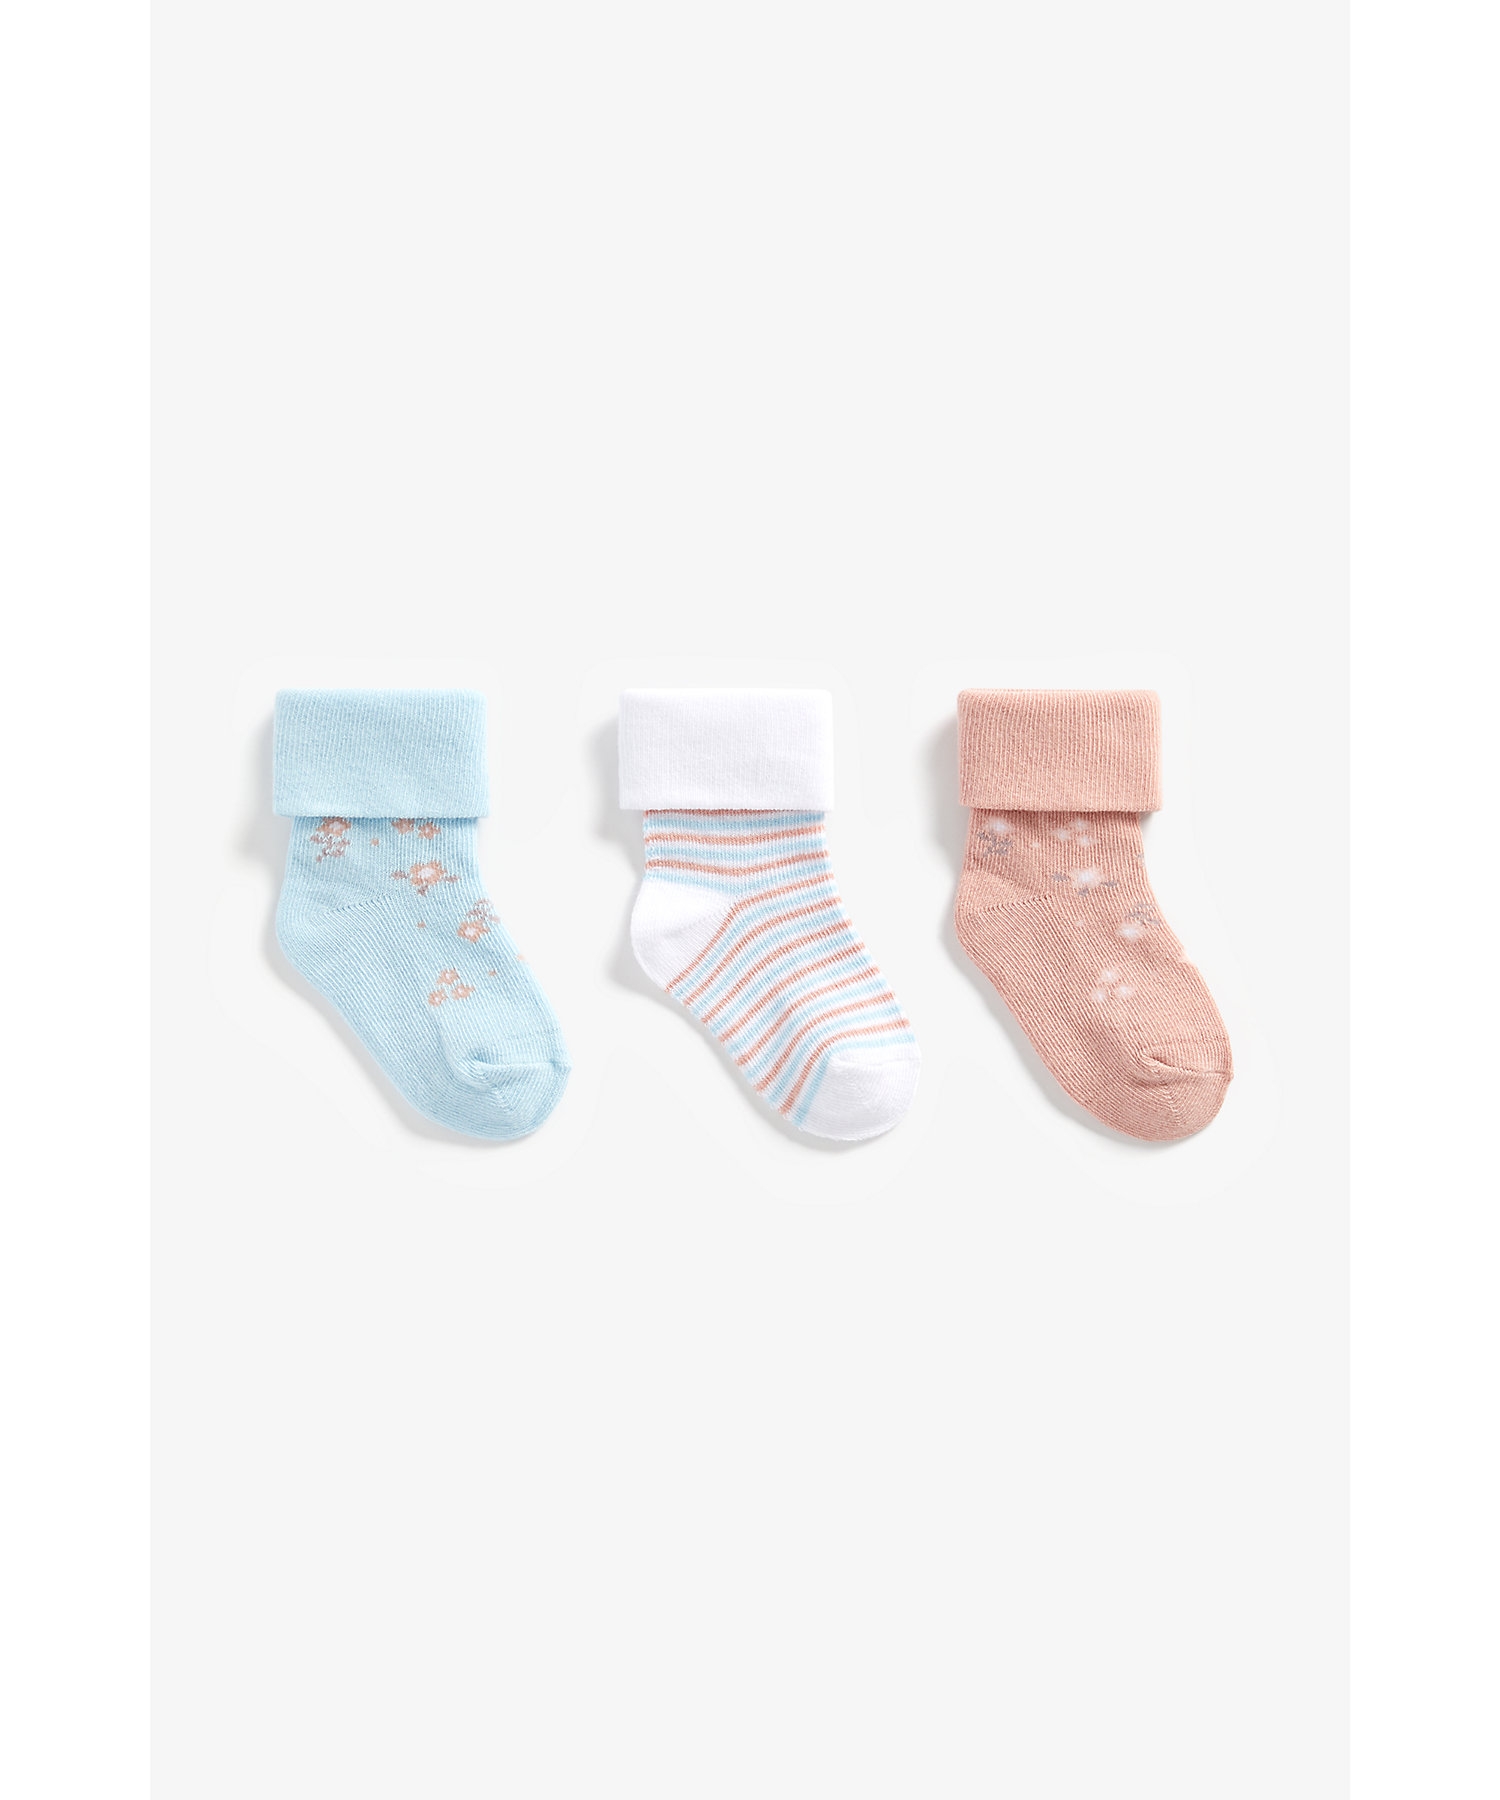 Mothercare | Girls Socks Striped And Floral Design - Pack Of 3 - Multicolor 0